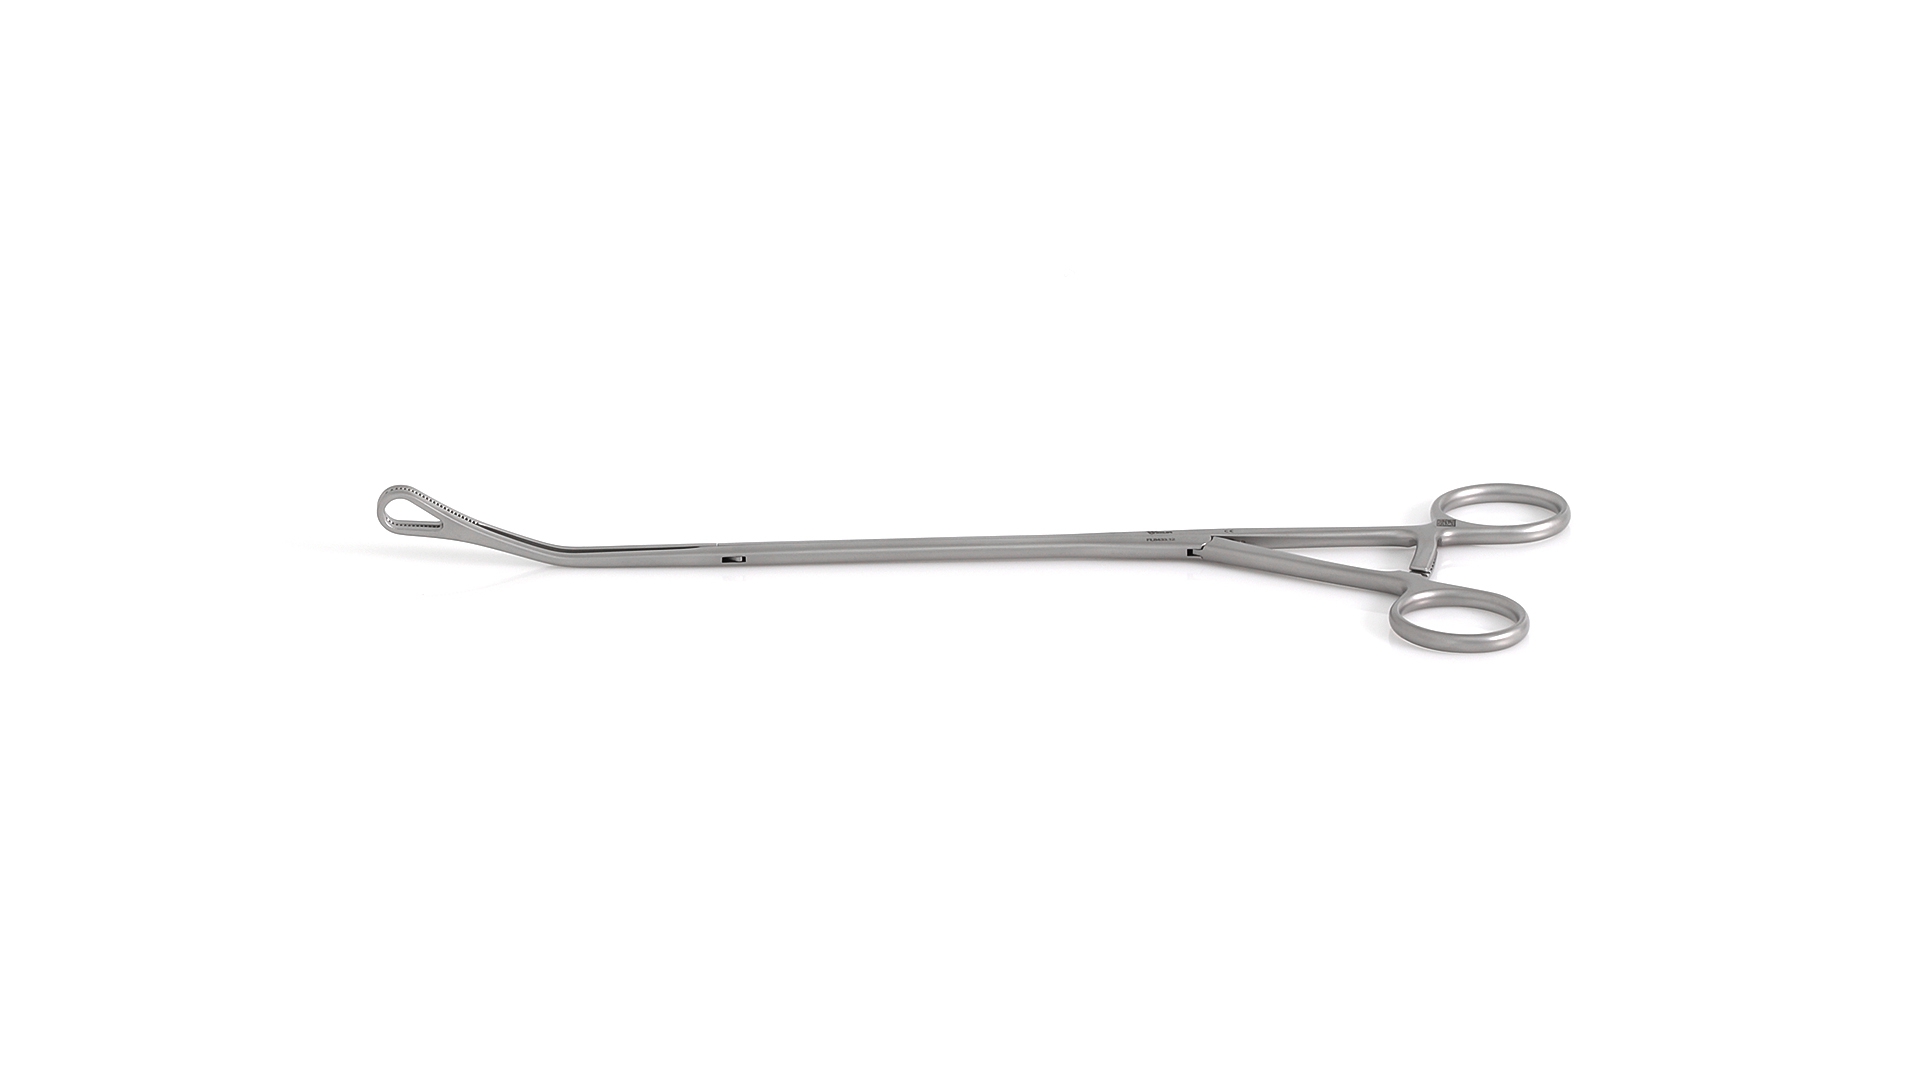 VATS Foerster Forceps - Curved Left 12mm Oval Serrated jaws